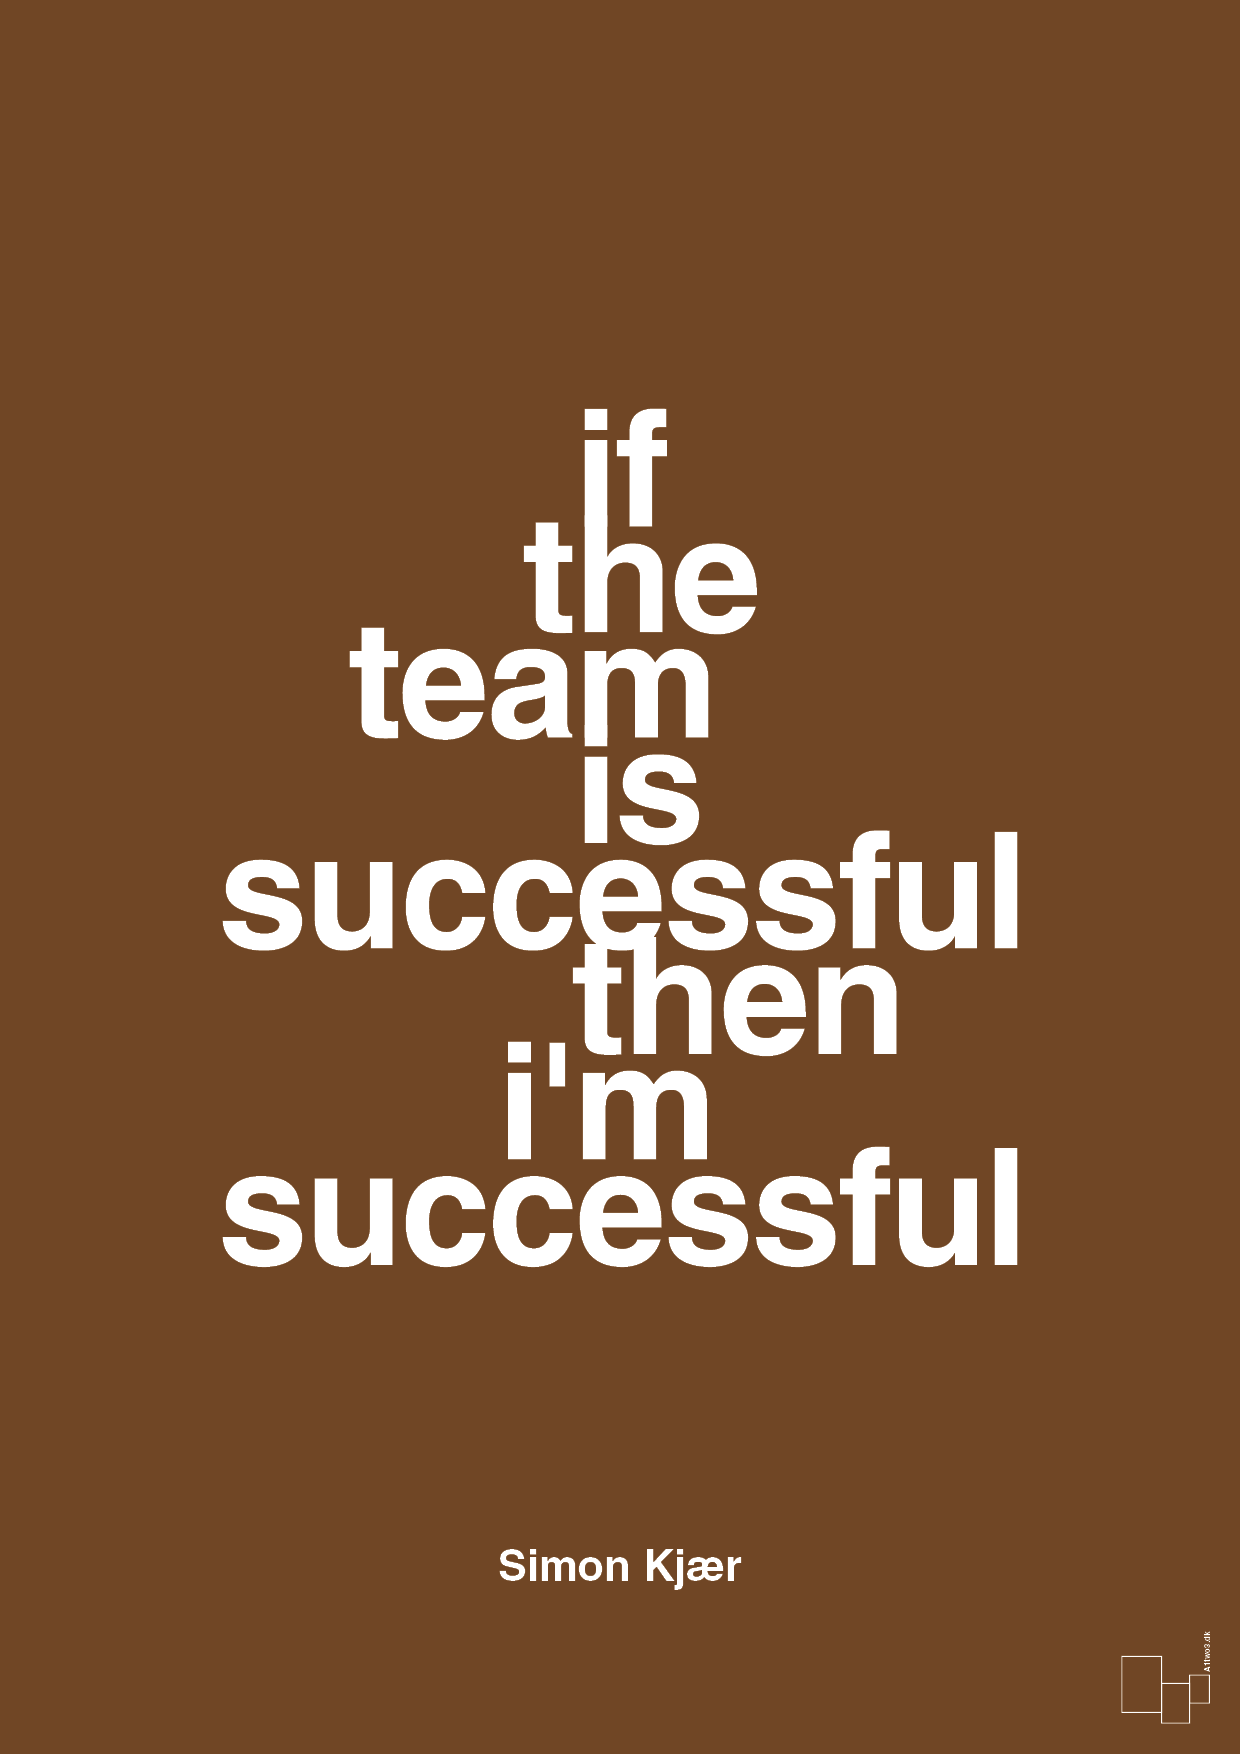 if the team is successful then i'm successful - Plakat med Citater i Dark Brown